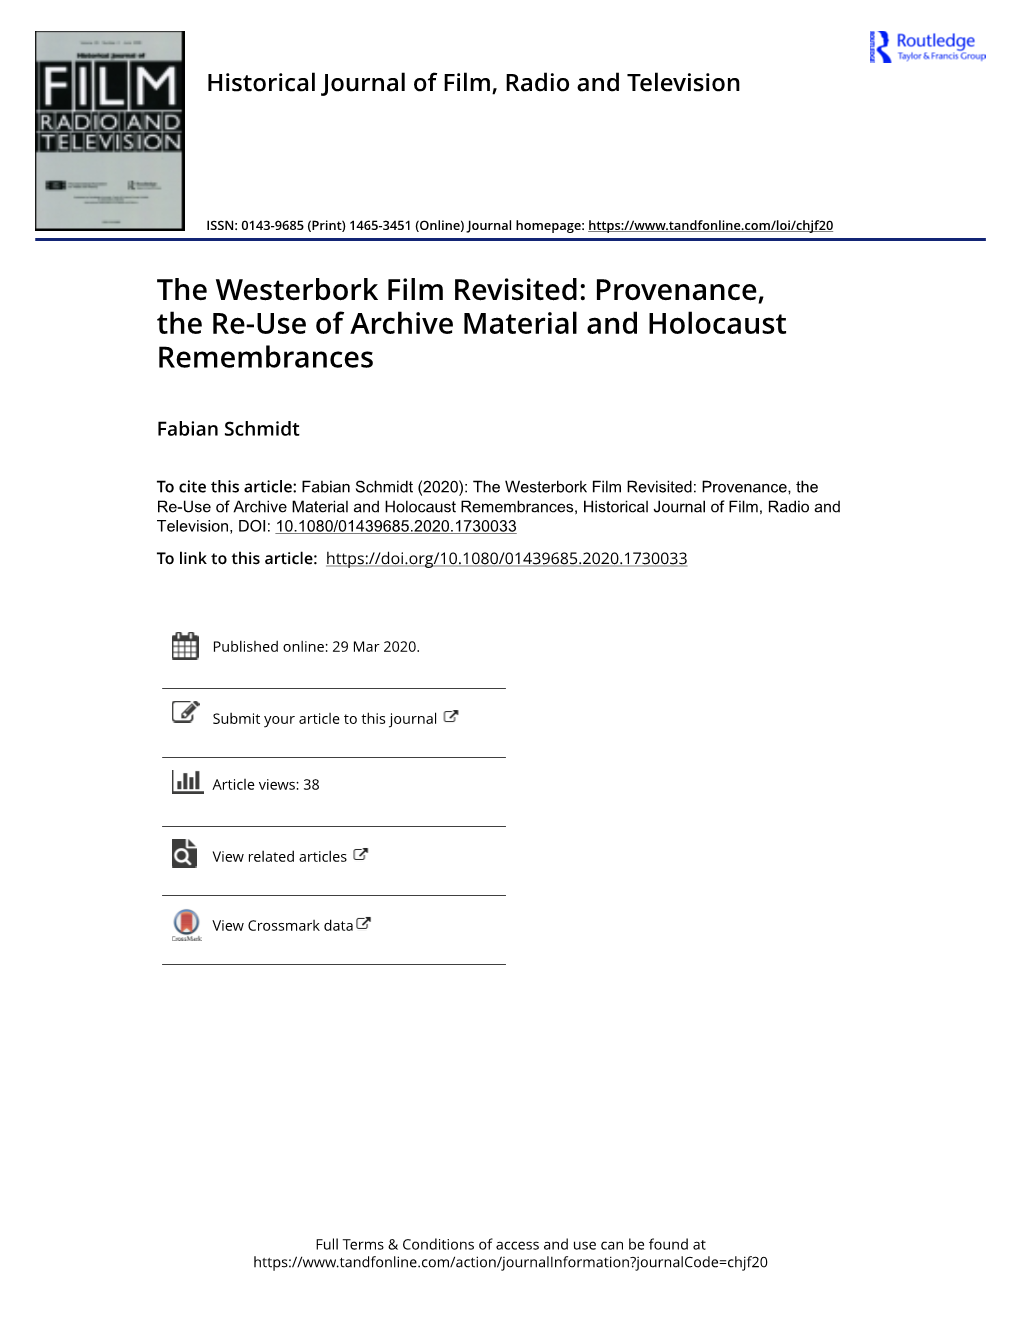 The Westerbork Film Revisited: Provenance, the Re-Use of Archive Material and Holocaust Remembrances